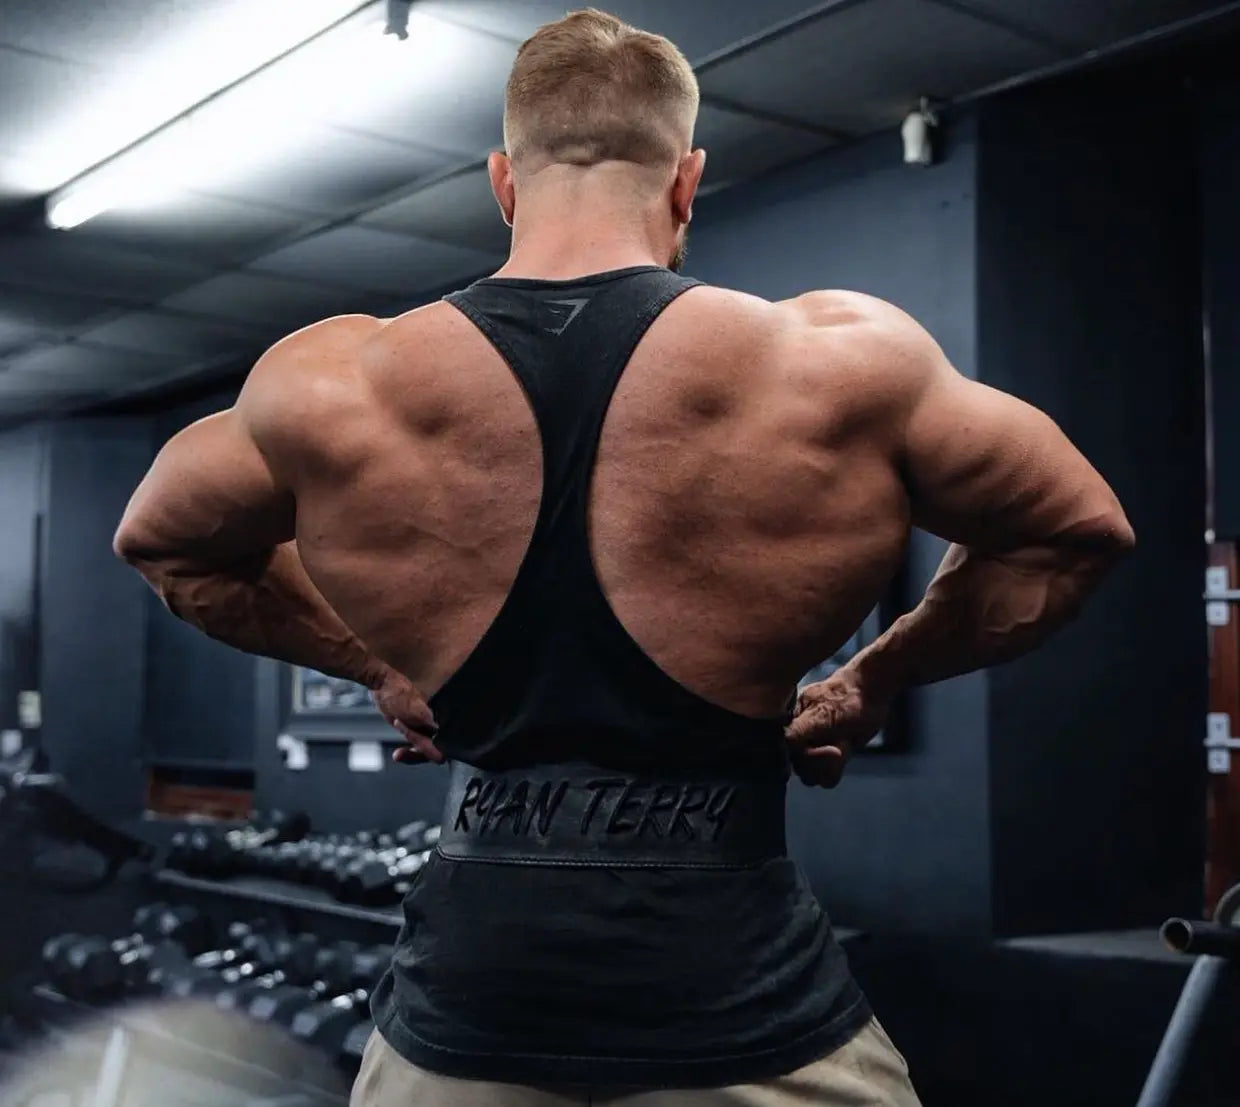 The Best Bodybuilding Shoulder Workout, Customized to Your Experience Level